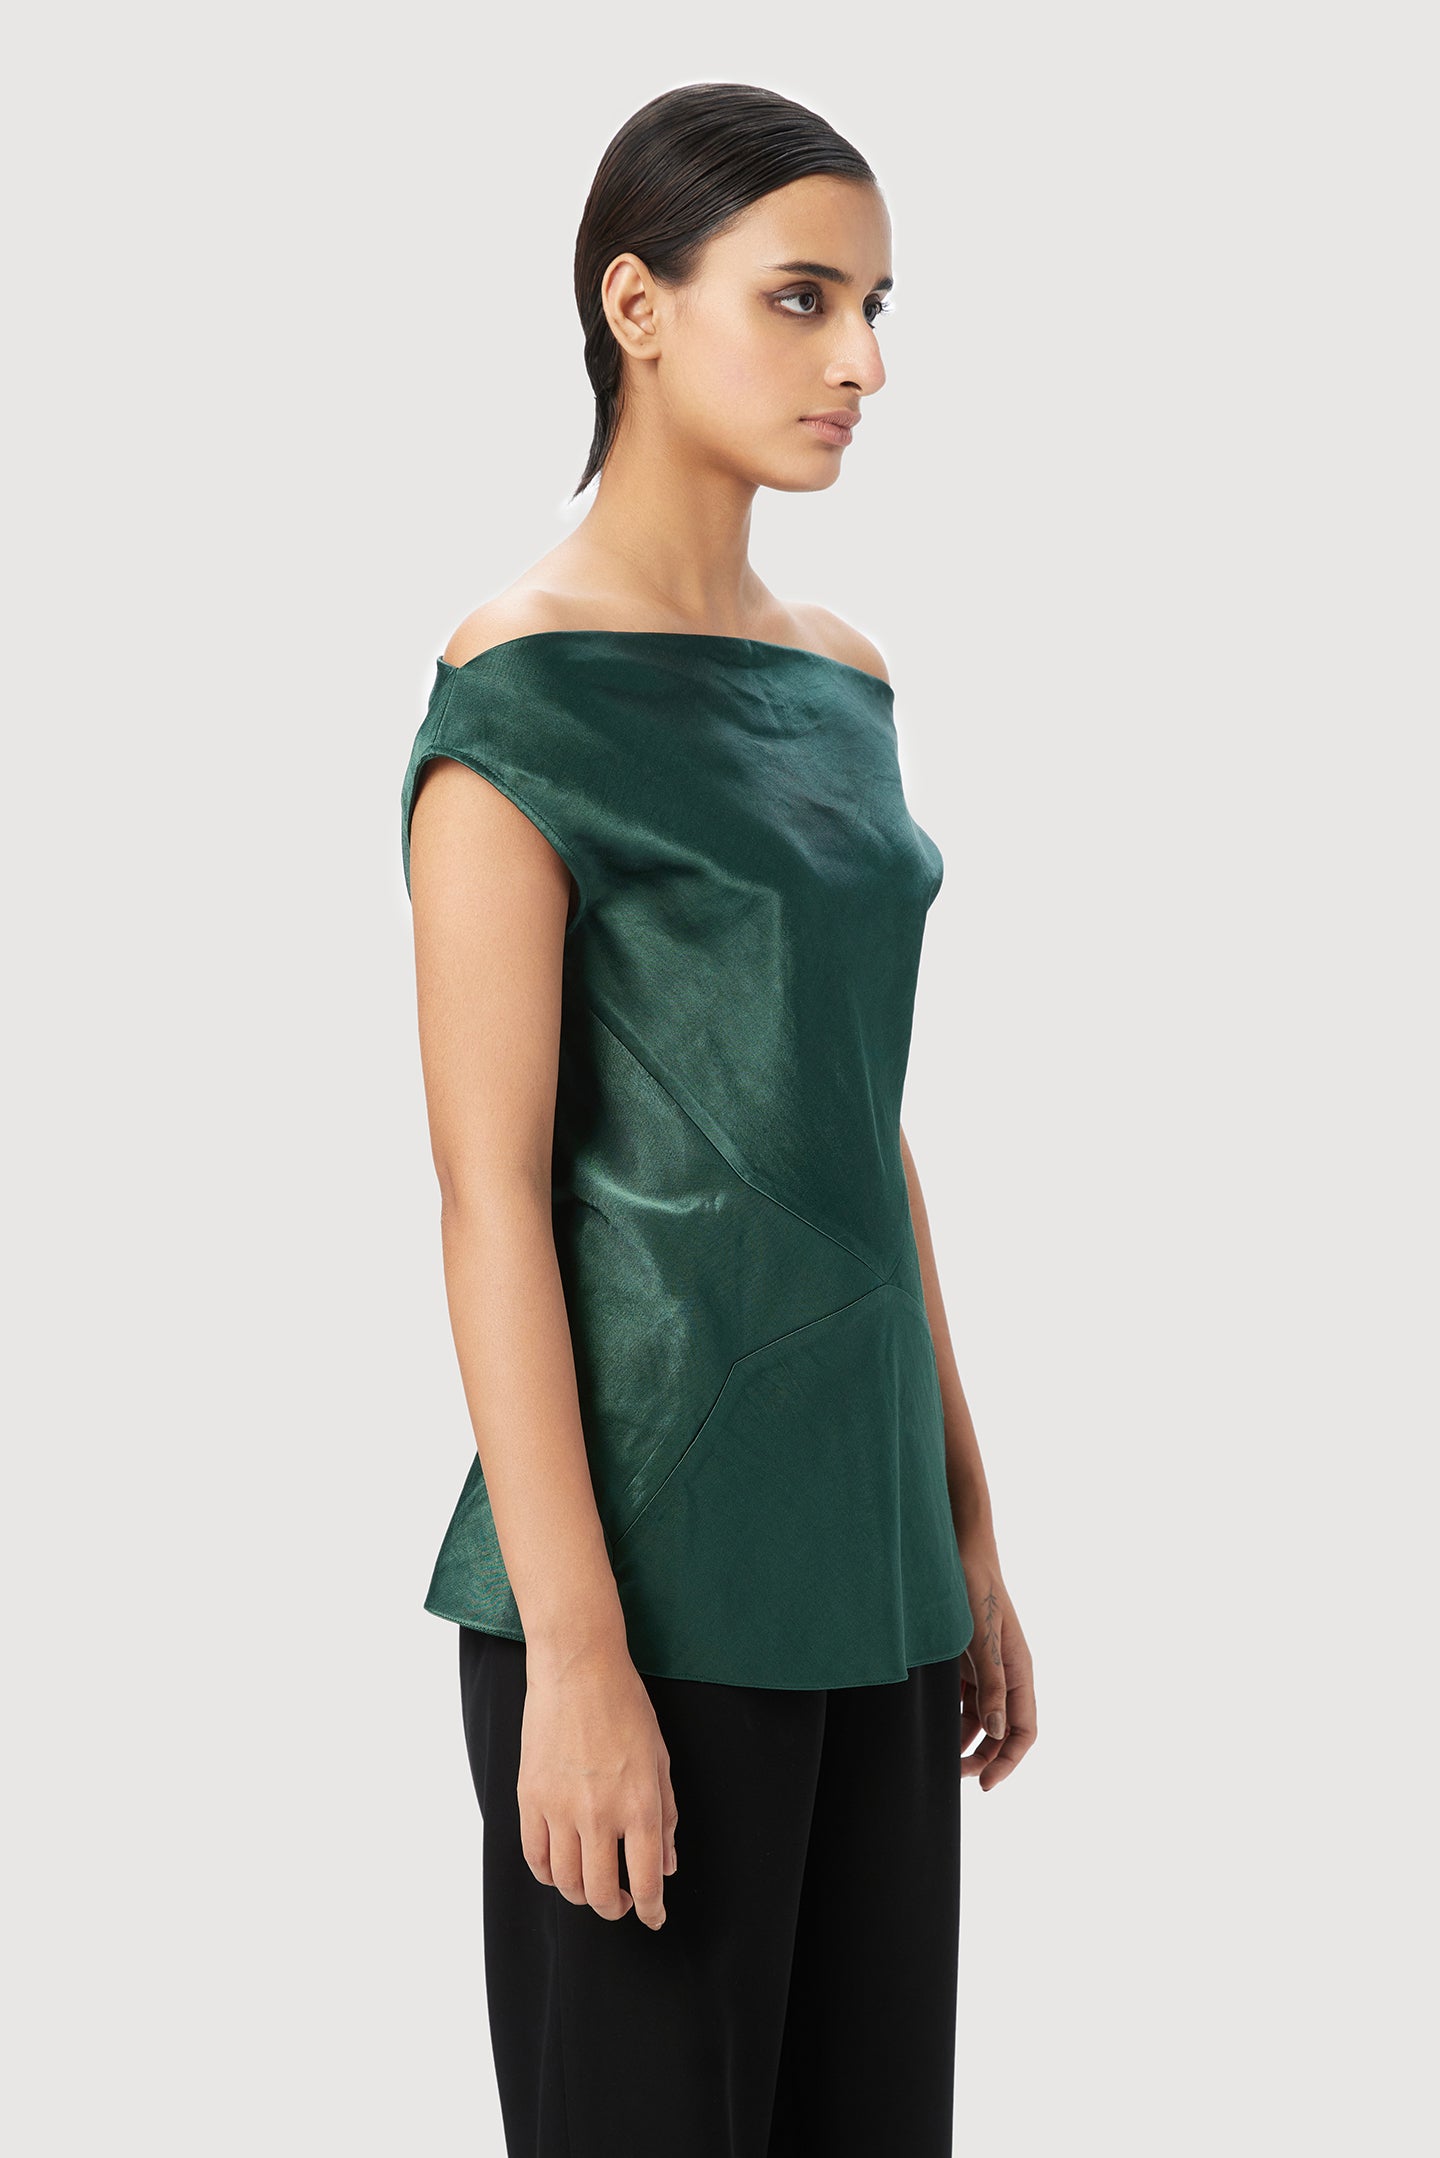 Slim Fit Sleeveless Top in Bias with Artful Cut-and-Sew Detail